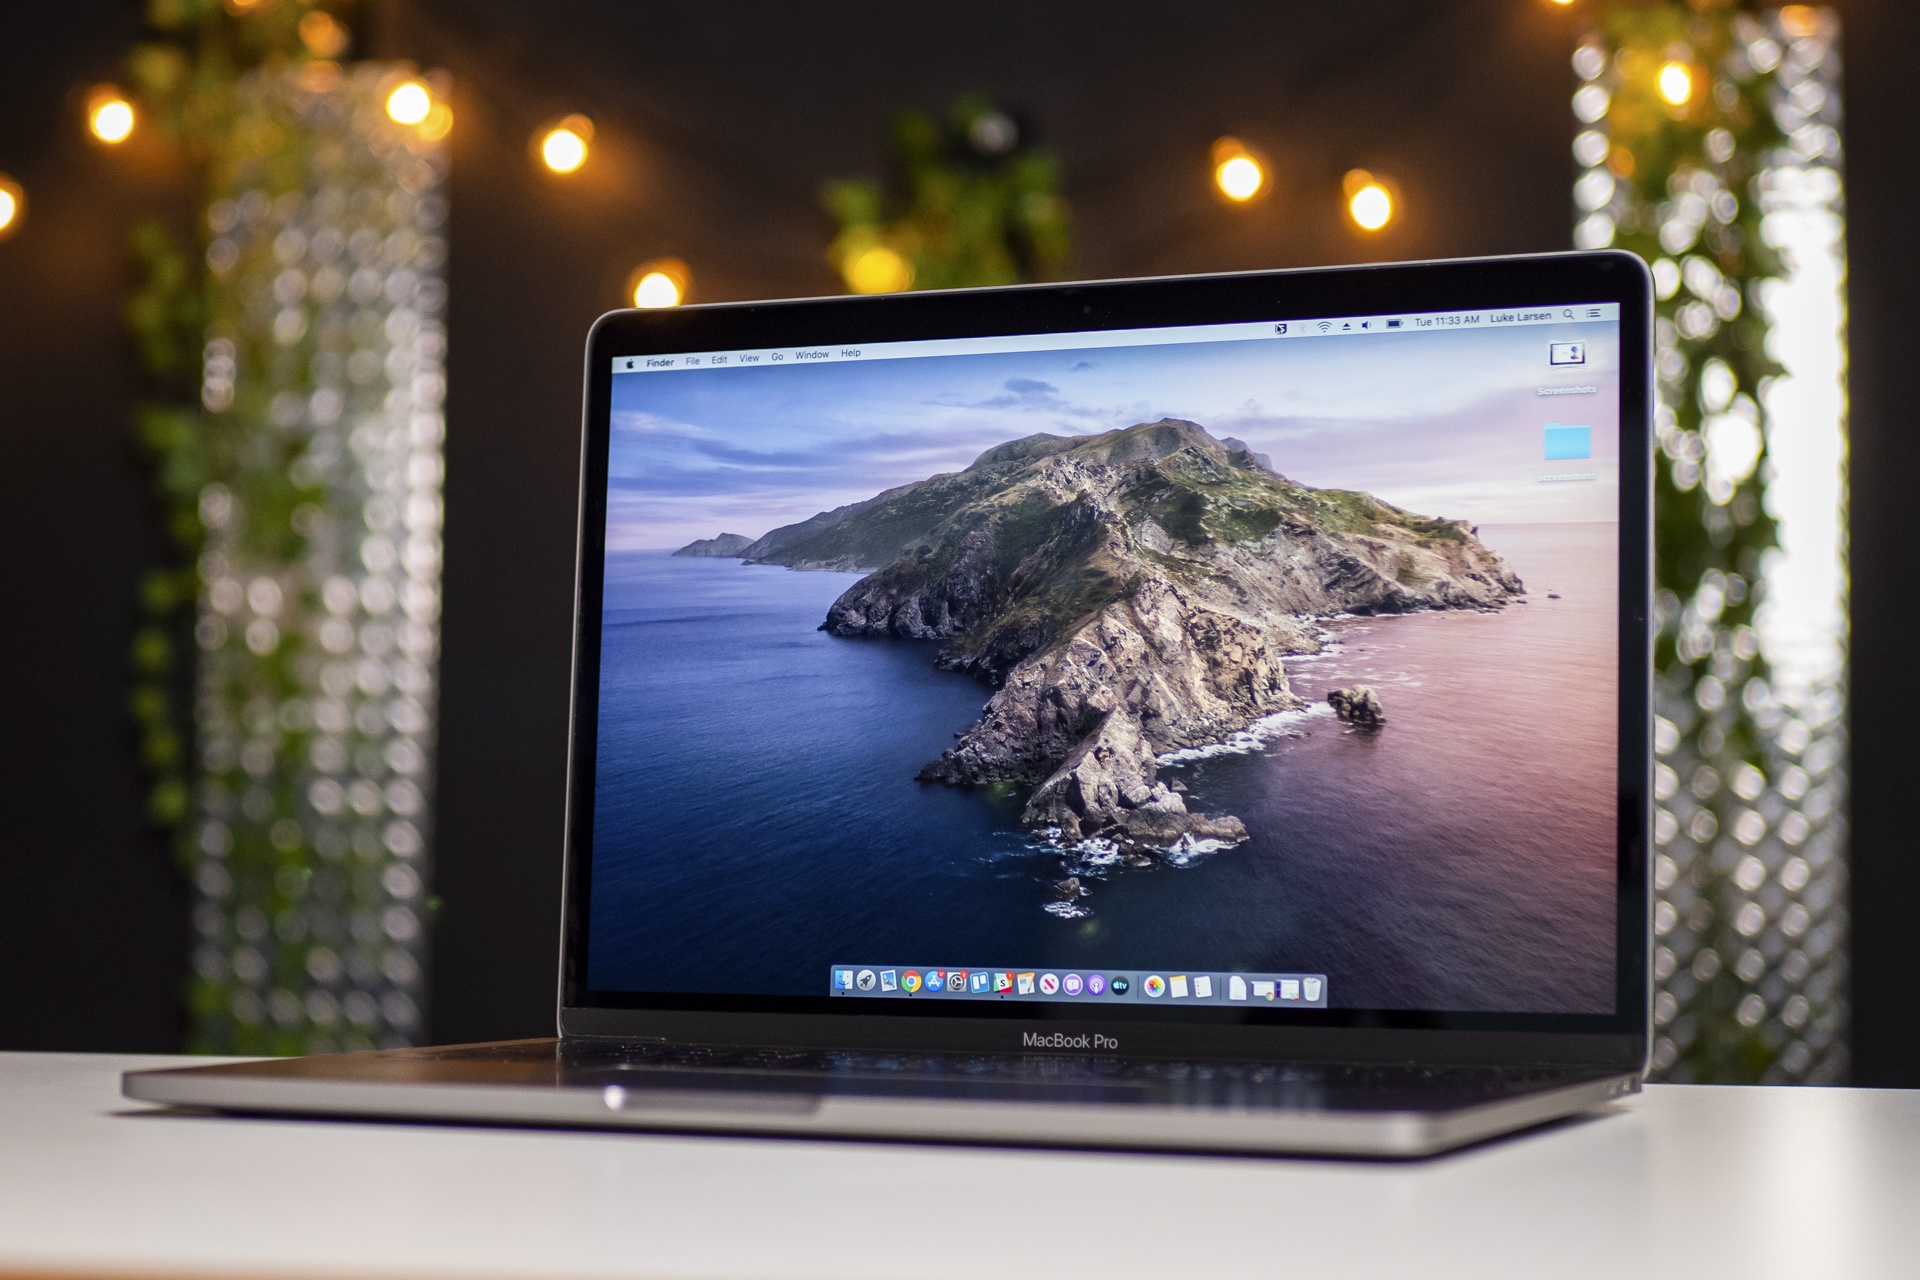 MacBook Pro (13-inch, 2019, Four Thunderbolt 3 ports) - Technical